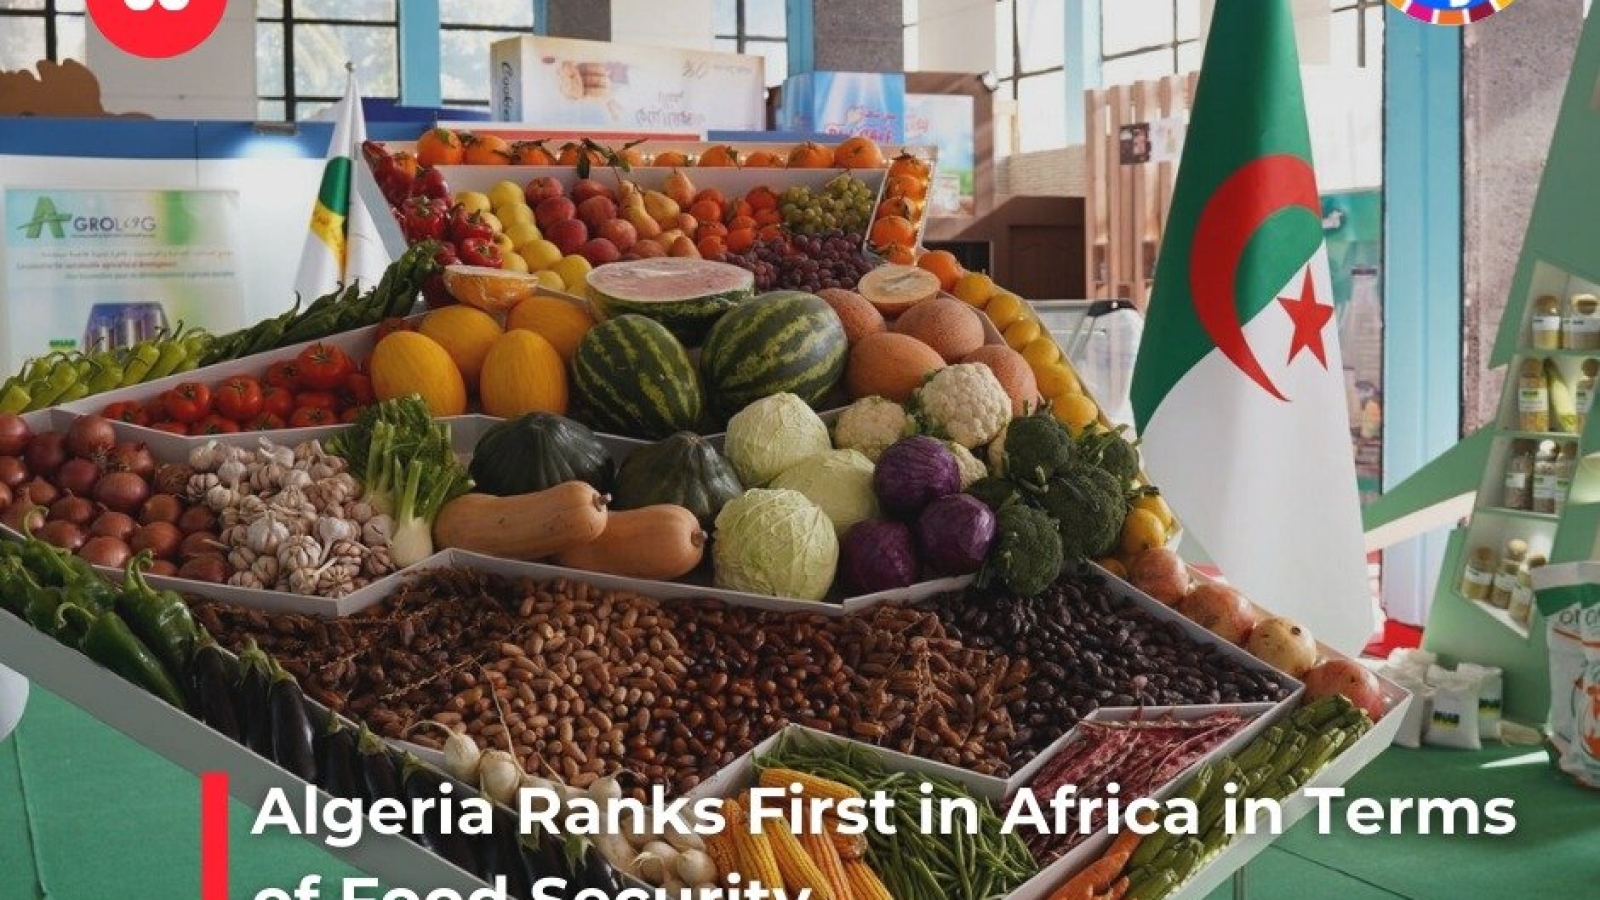 Algeria Ranks First in Africa in Terms of Food Security